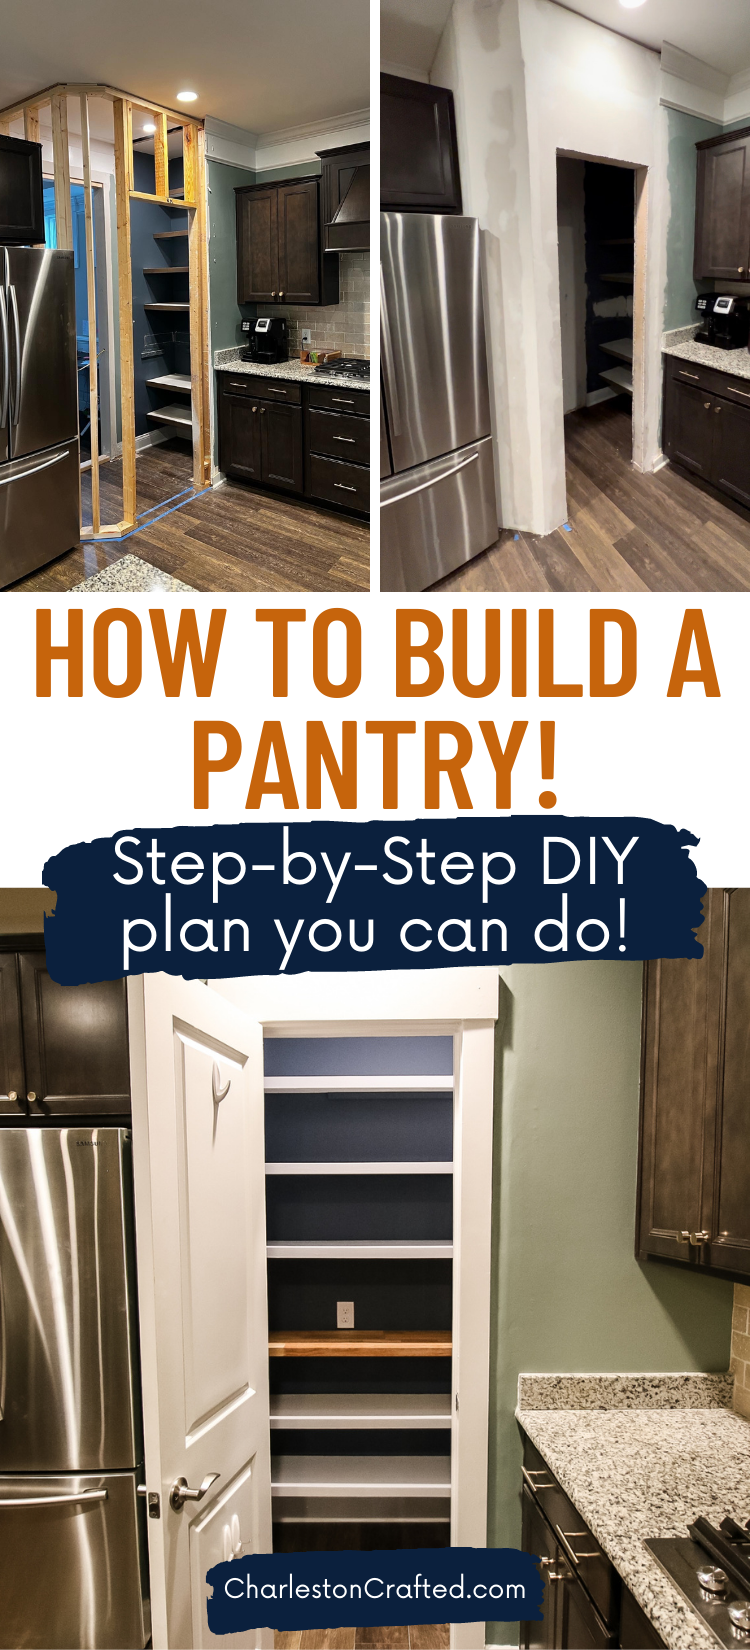 How To Build A Pantry Pin Image 